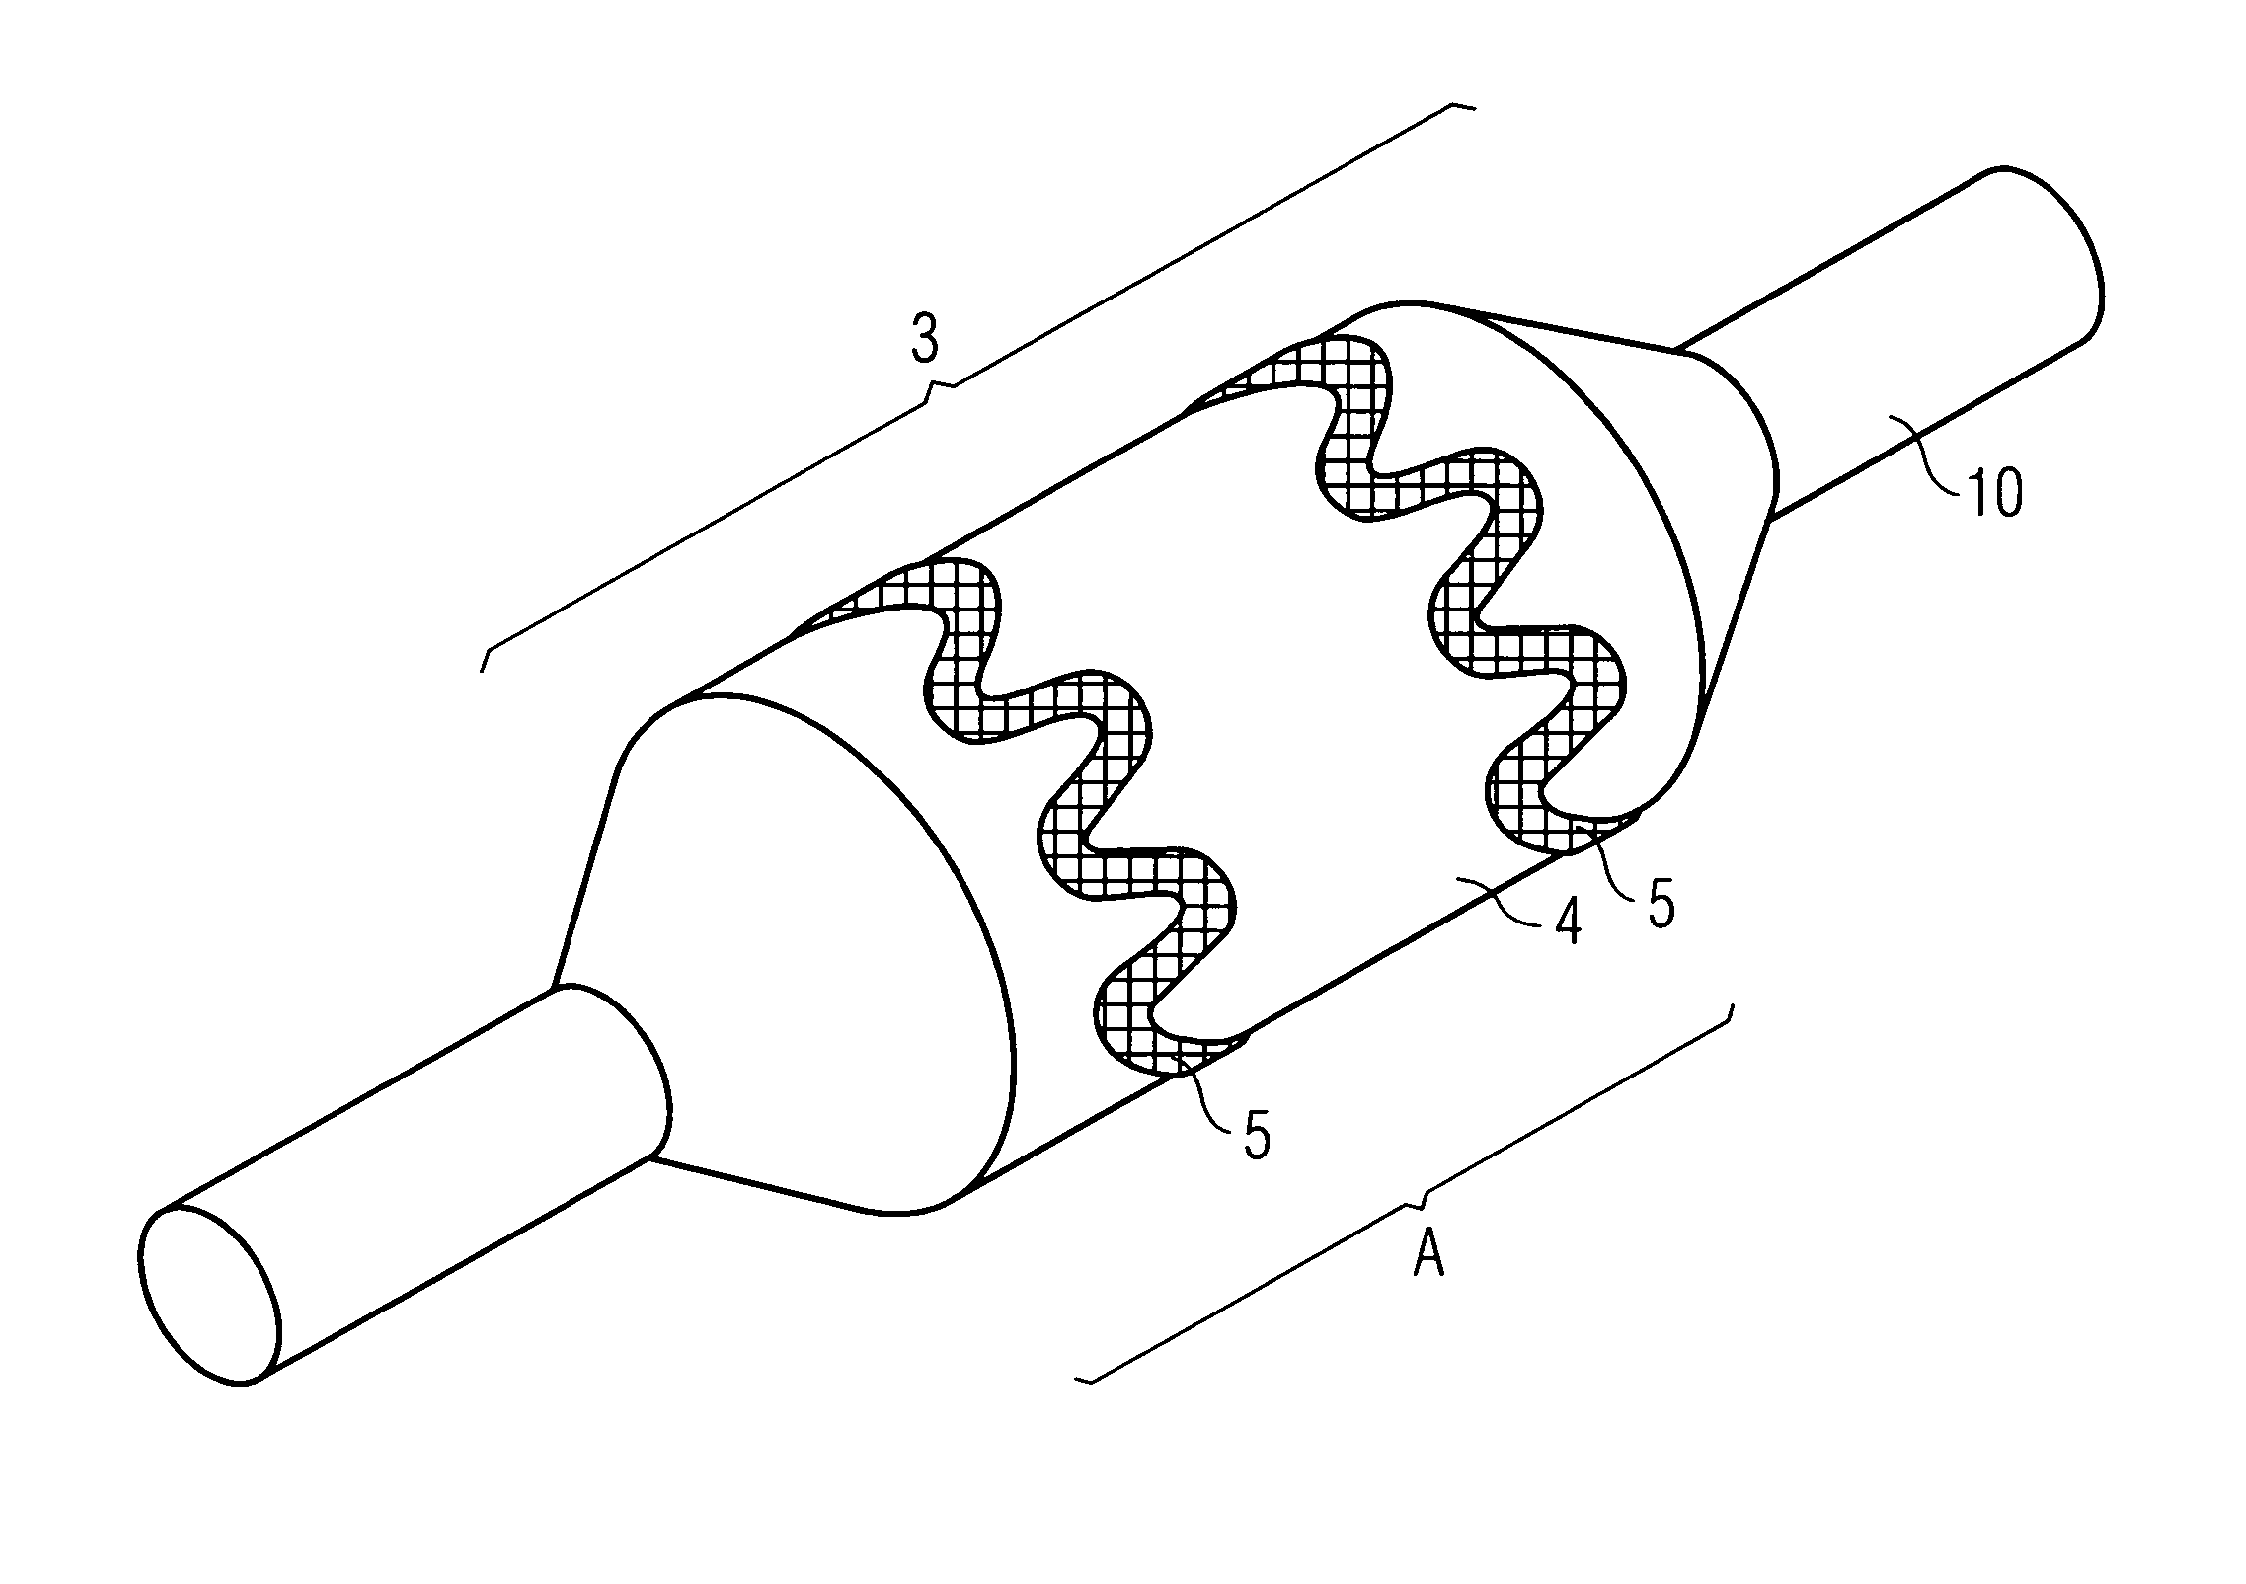 Double layered balloons in medical devices